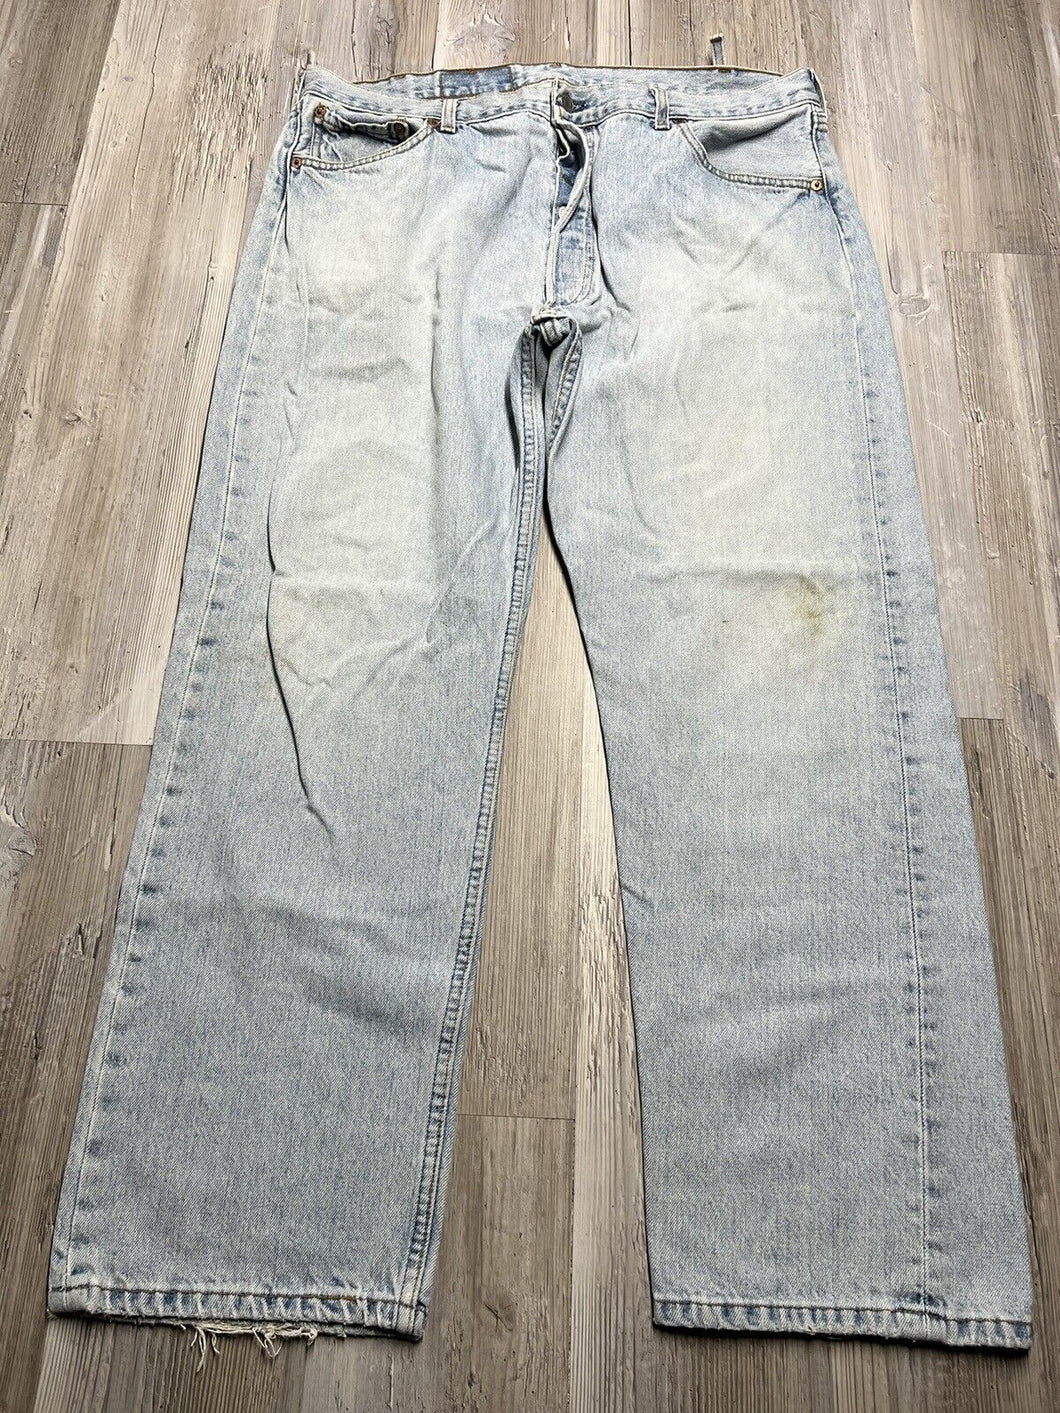 Men's Vintage Levi's 501 Jeans - Light Wash Faded - Size 40x30 - Made in USA